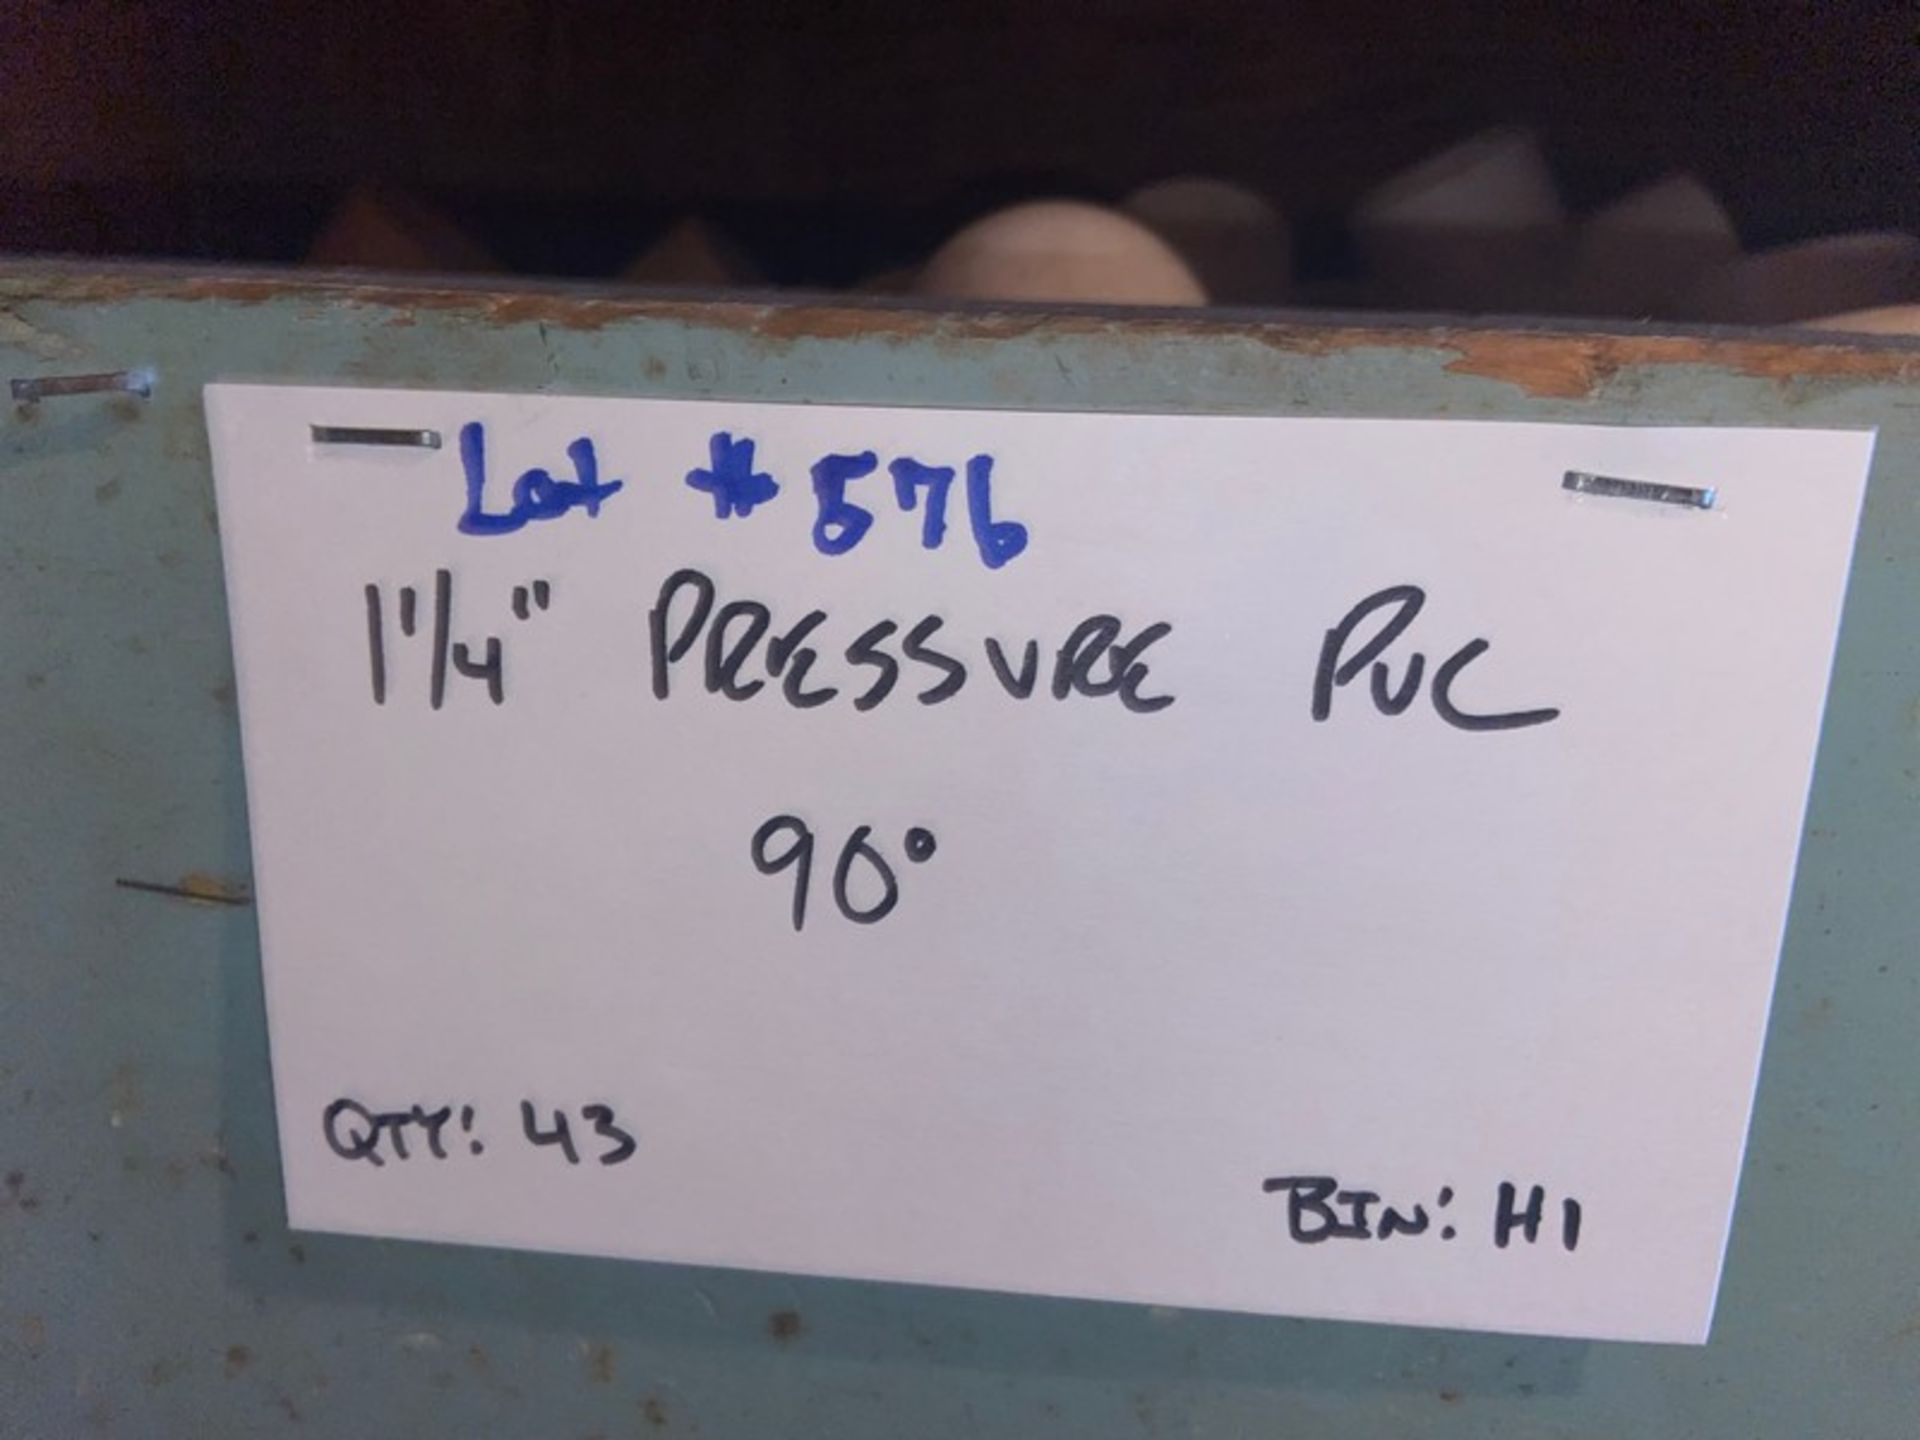 1 1/4” Pressure PVC 90’ (Bin:H1)(LOCATED IN MONROEVILLE, PA) - Image 3 of 4